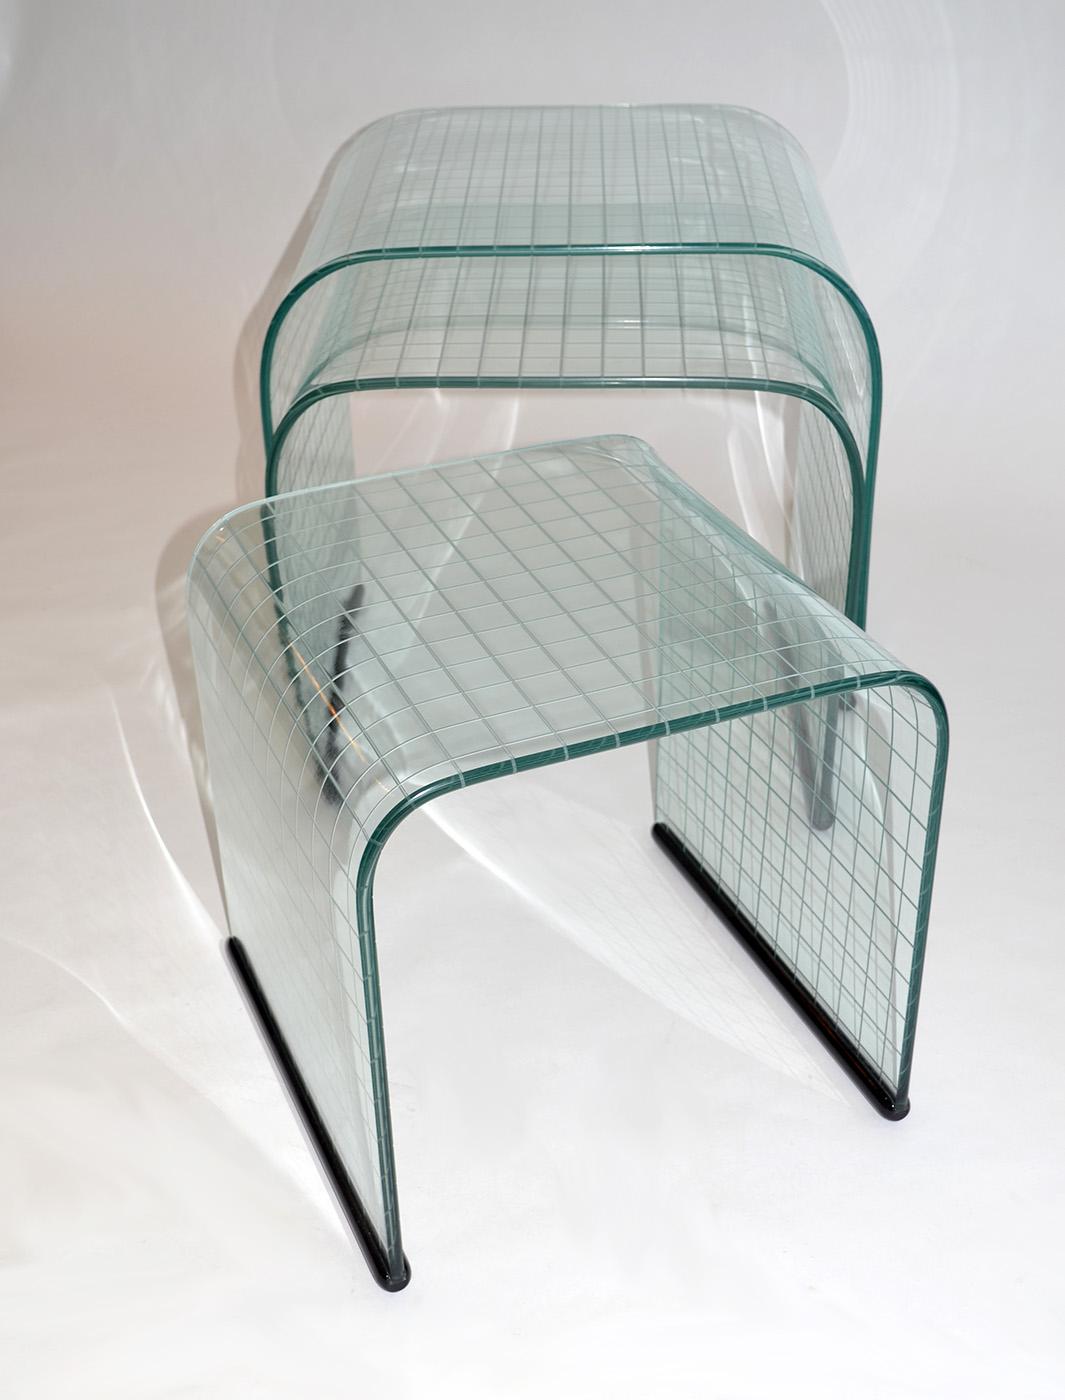 Modern Set of Three Glass Side Nesting or Stacking Tables, Fiam, Italy, 1980s